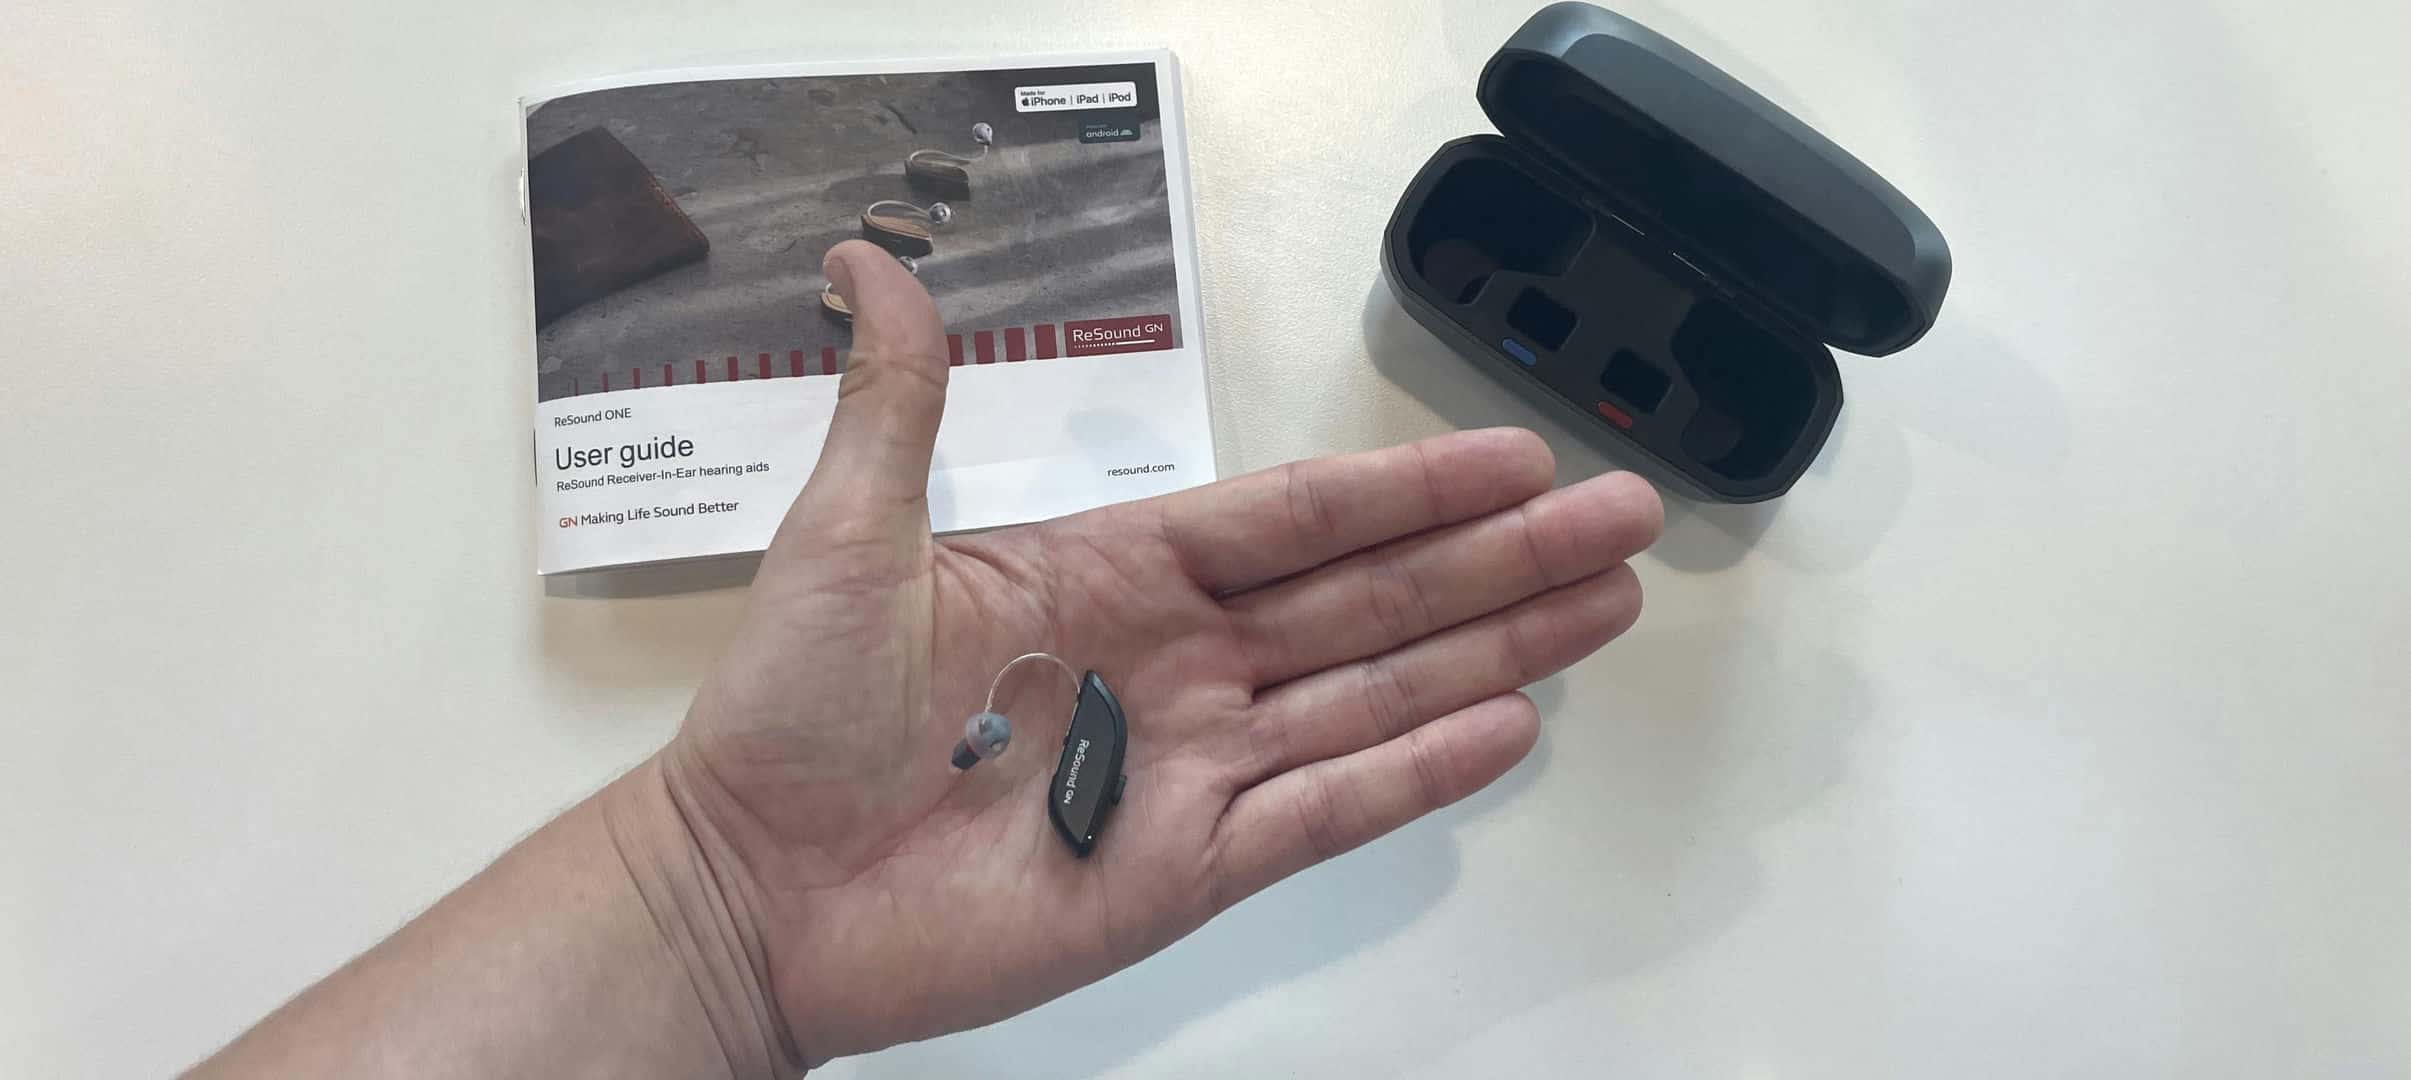 Resound hearing aid in outstretched hand with charging case and instruction manual